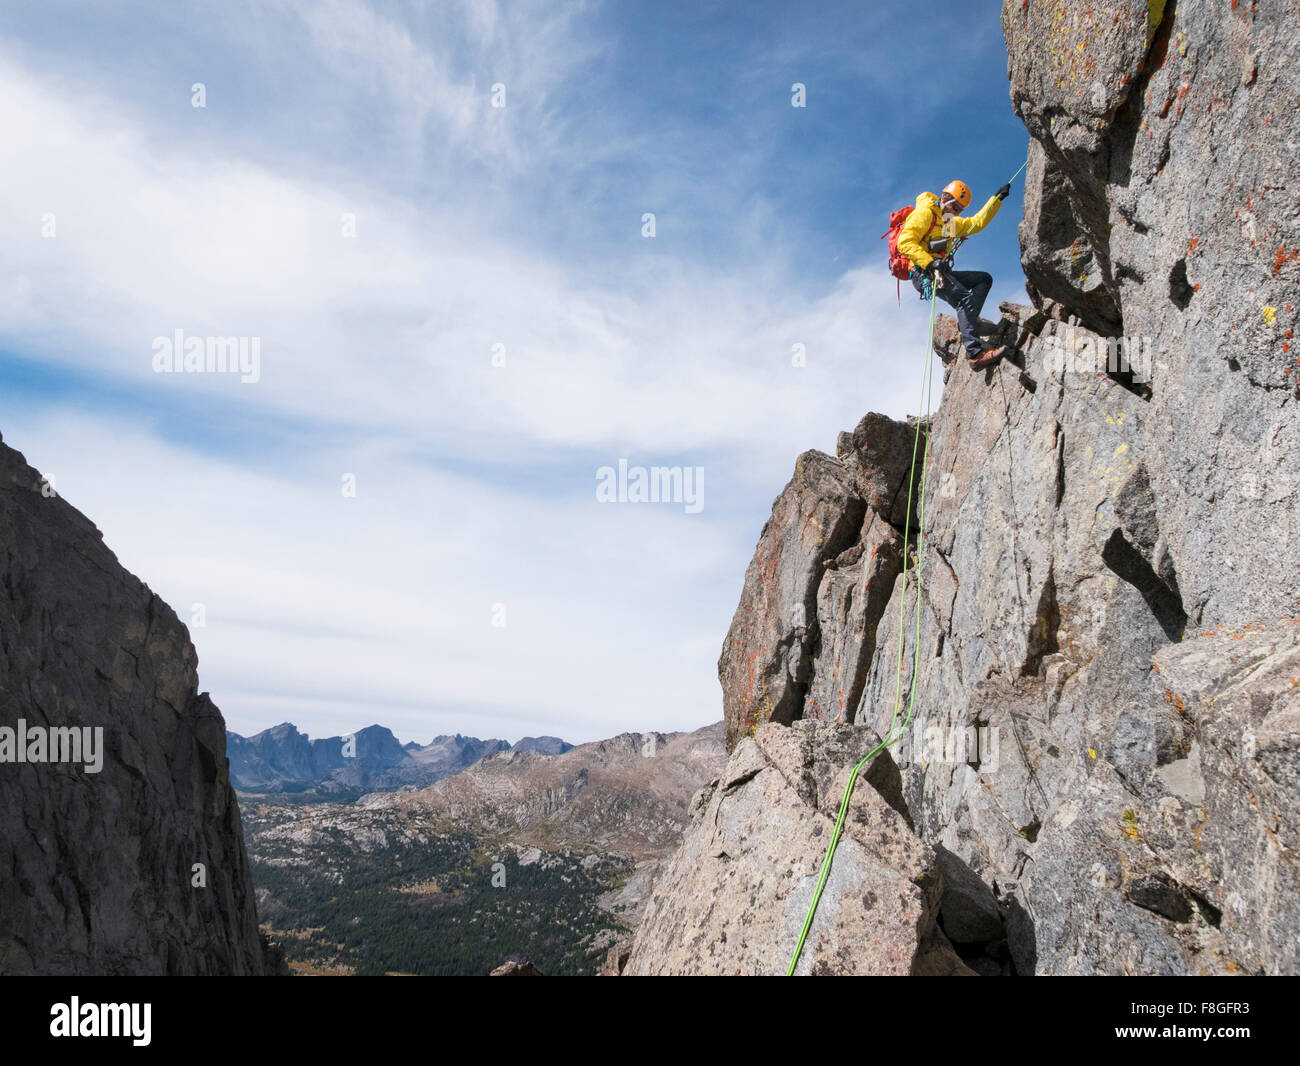 Caucasian climber rappelling on mountainside Stock Photo